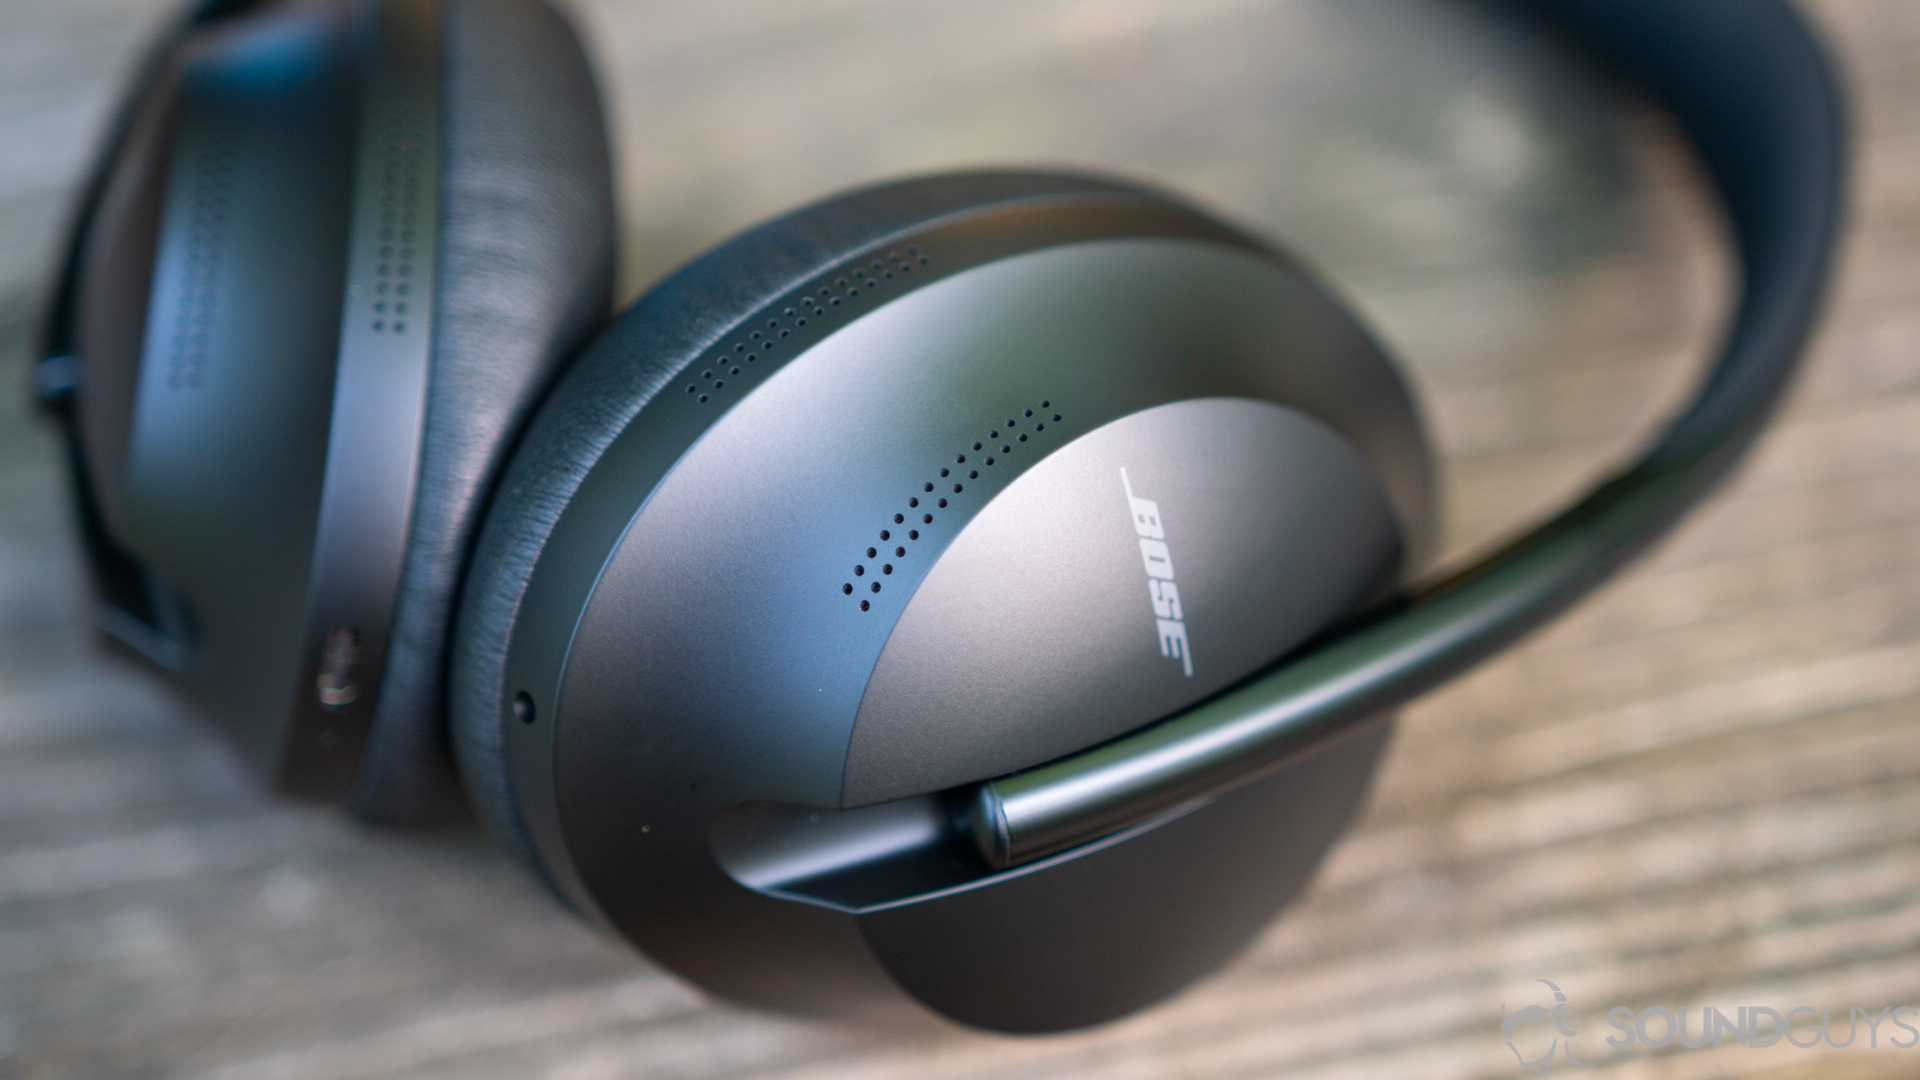 The Bose Noise Canceling Headphones 700 on a wooden surface with the Bose logo in focus.